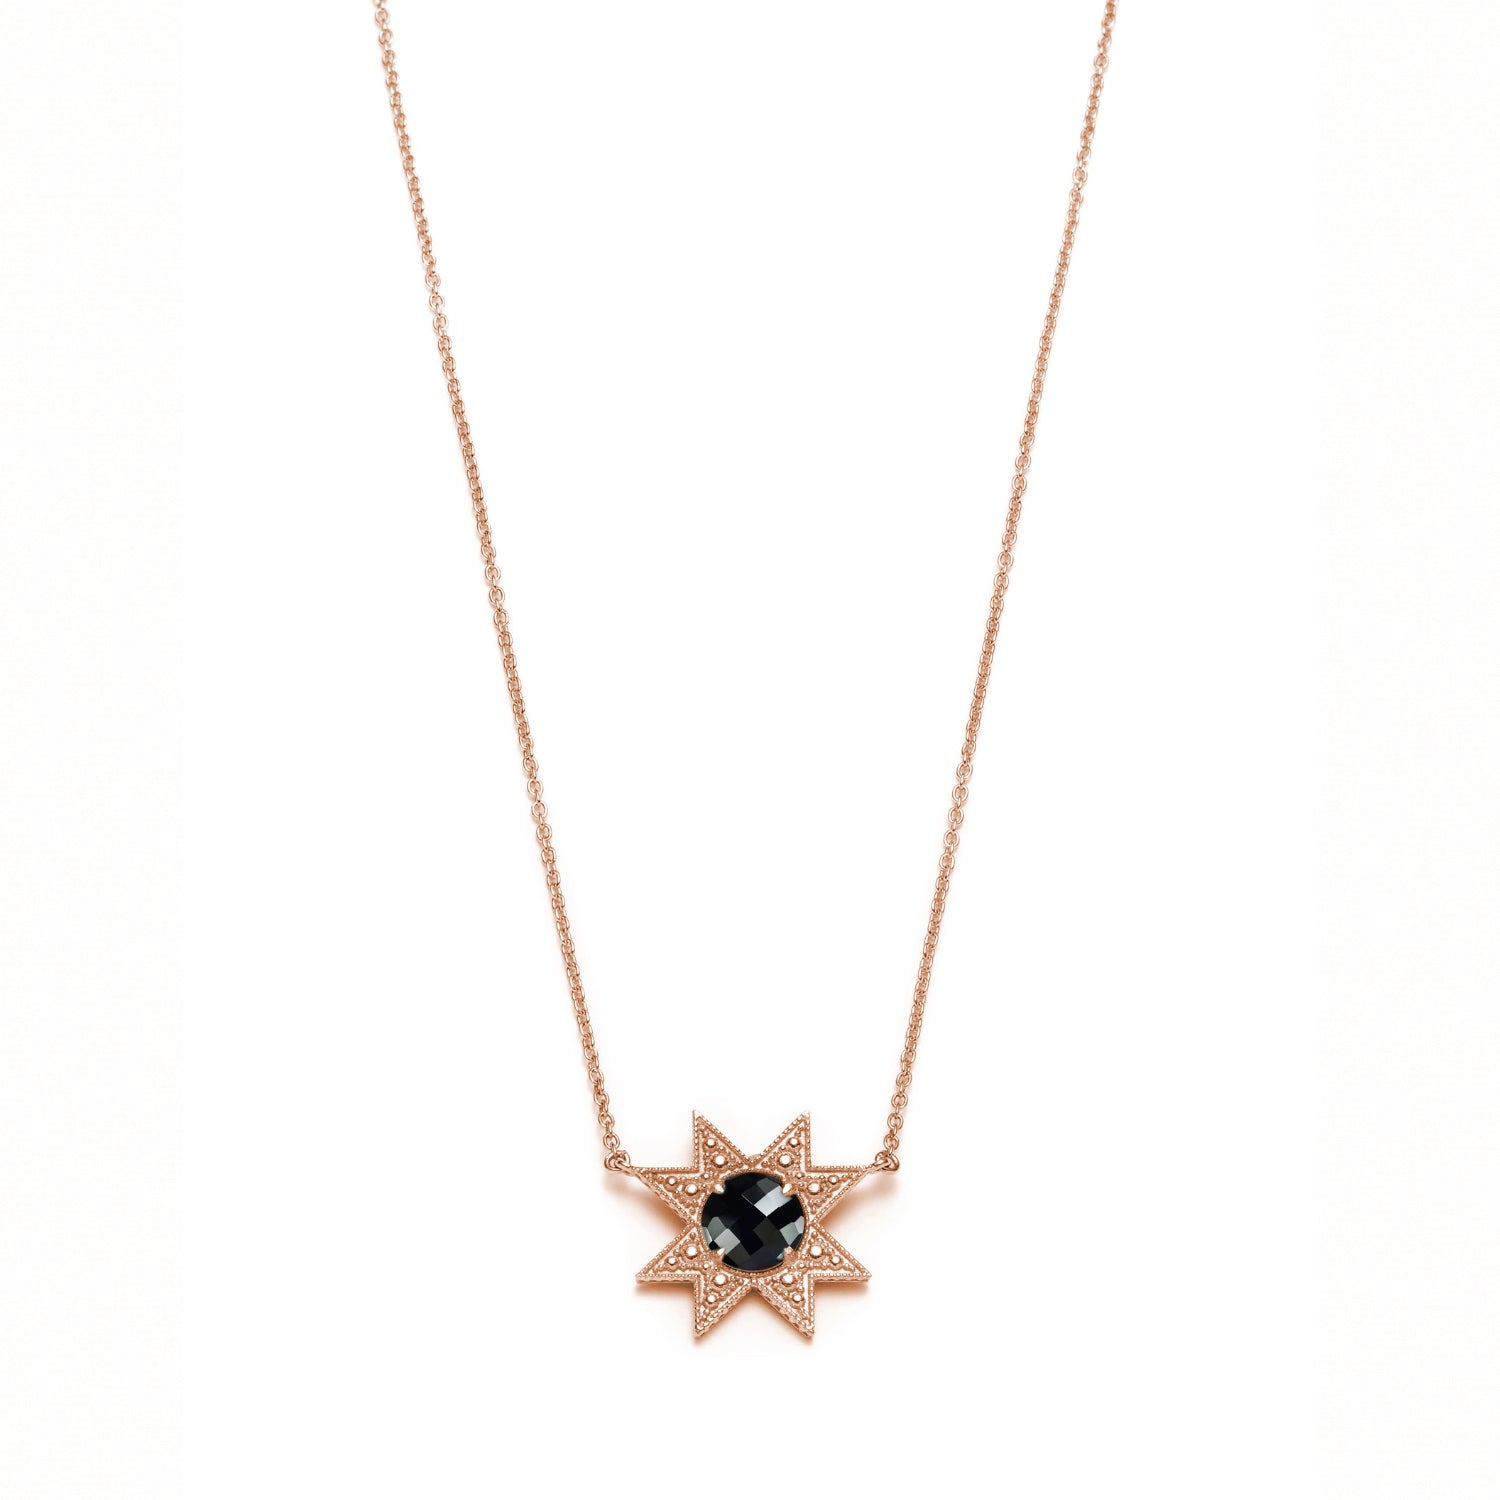 Asteri Checkerboard Cut Black Onyx Star Necklace in Rose Gold